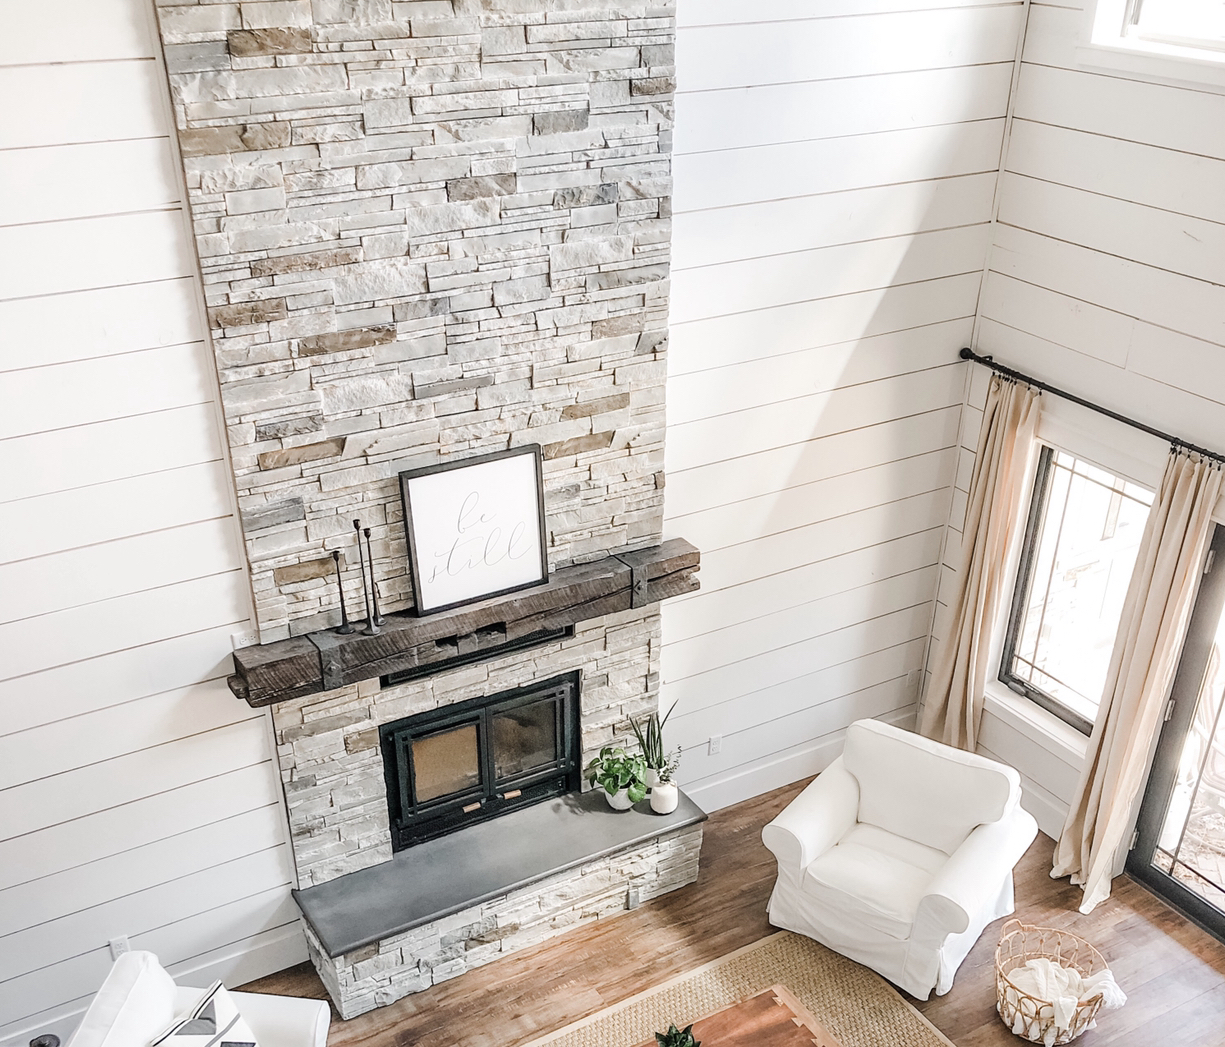 Fireplace surround made with Versetta Stone in the Ledgestone profile and Mission Point colorway.